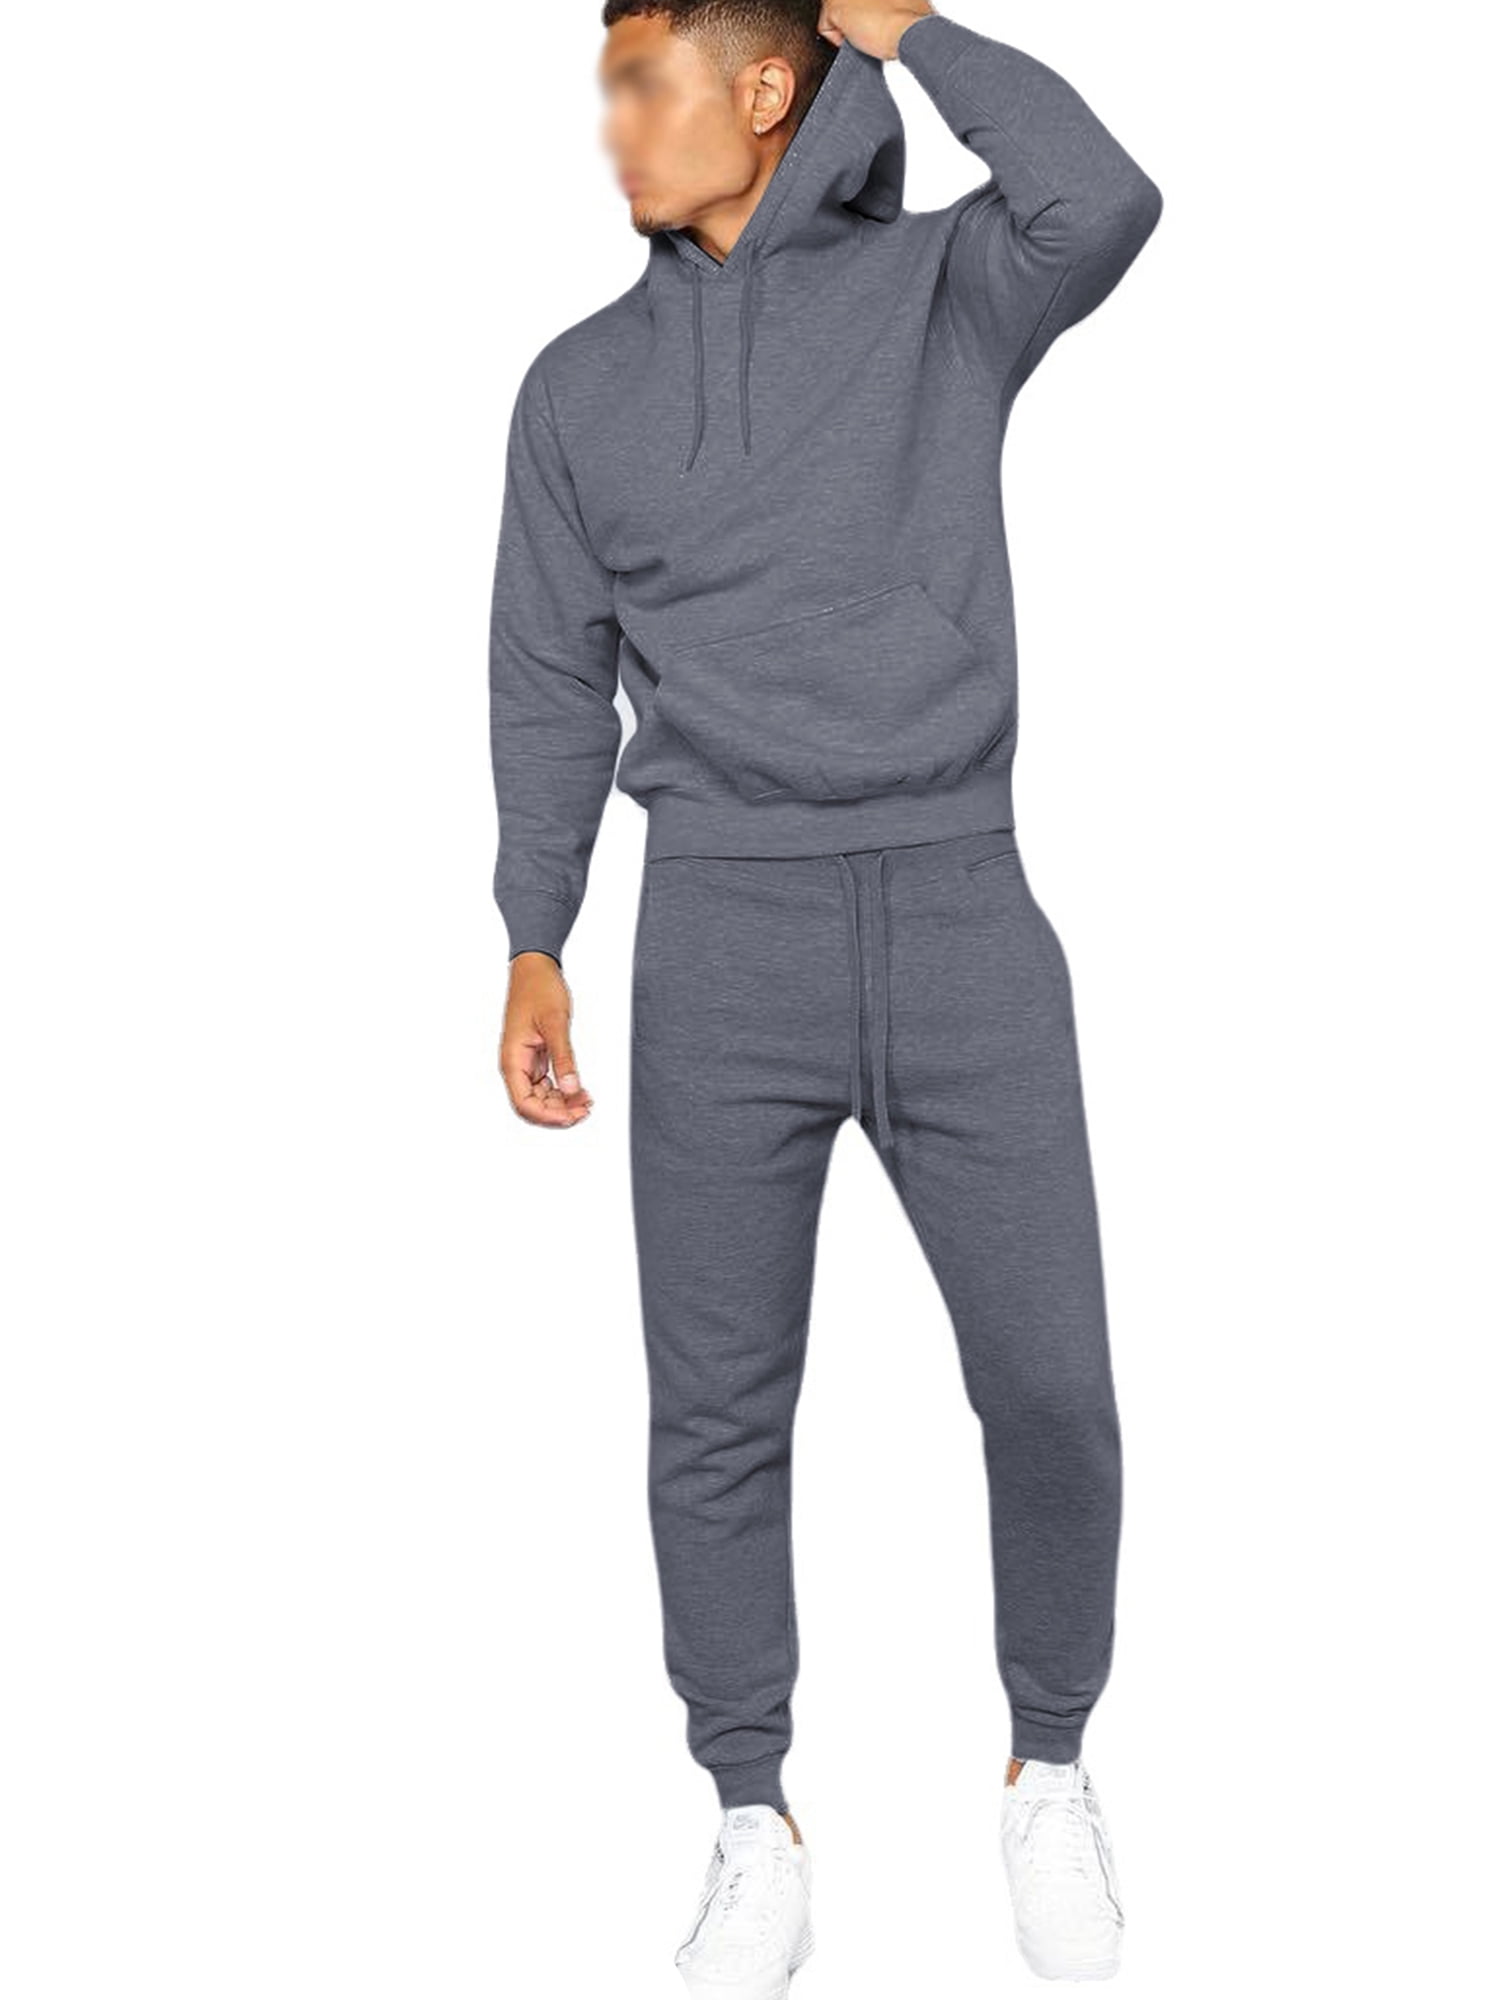 Men's Baggy Tracksuits 2 Piece Outfits Long Sleeve Hoodie Jogger Sports Set  Casual Loose Fall Winter Pullover Sweatsuits